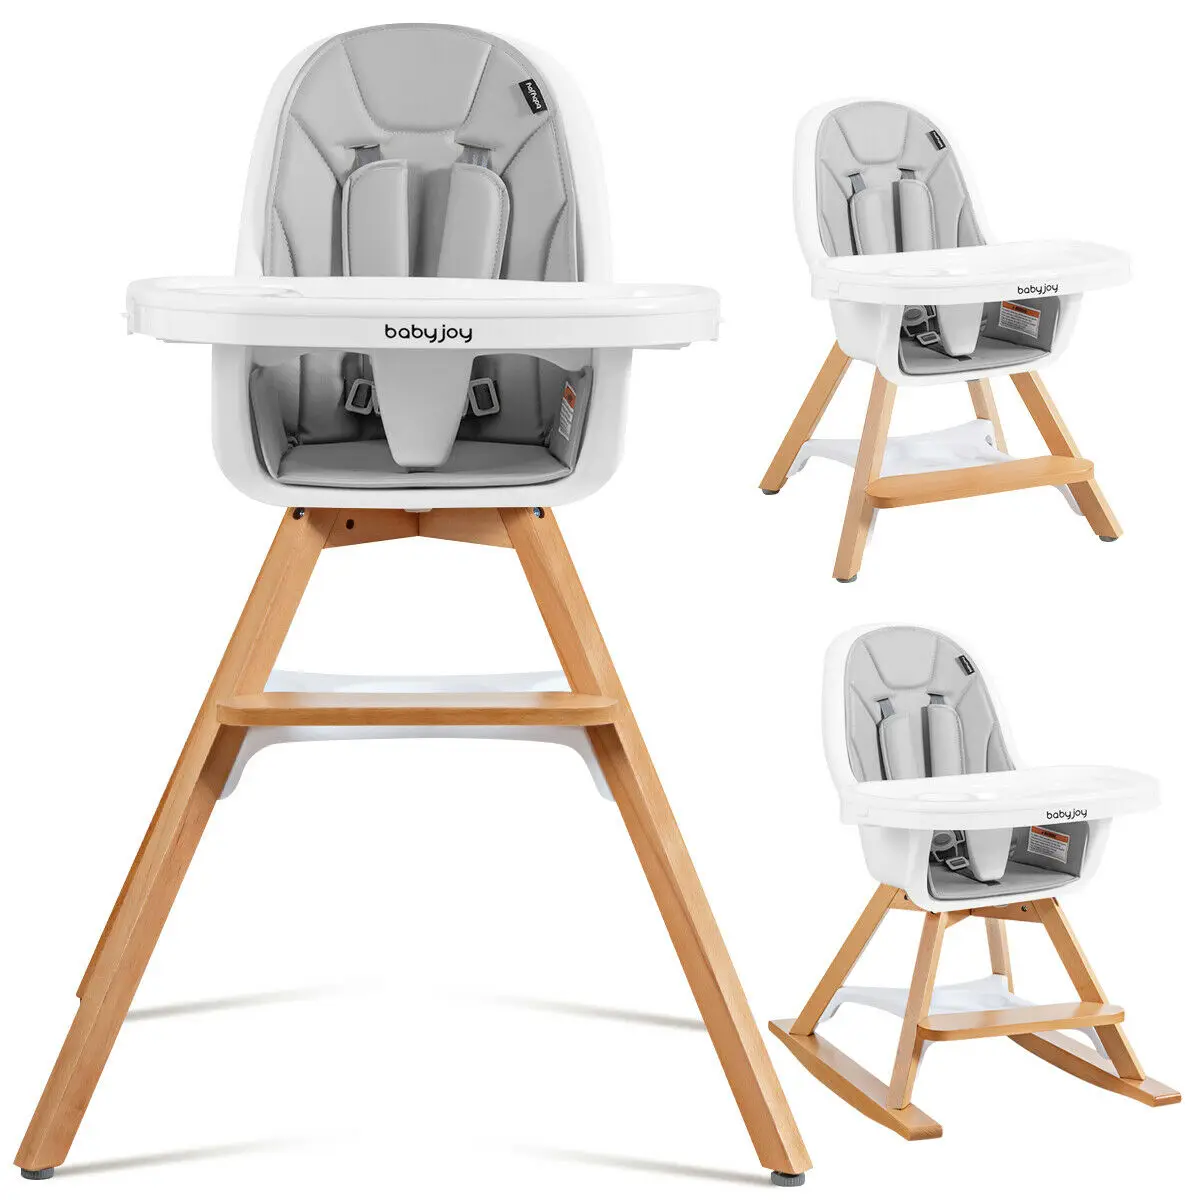 Babyjoy 3-in-1 Convertible Wooden Baby High Chair w/ Tray Adjustable Legs  BB5581